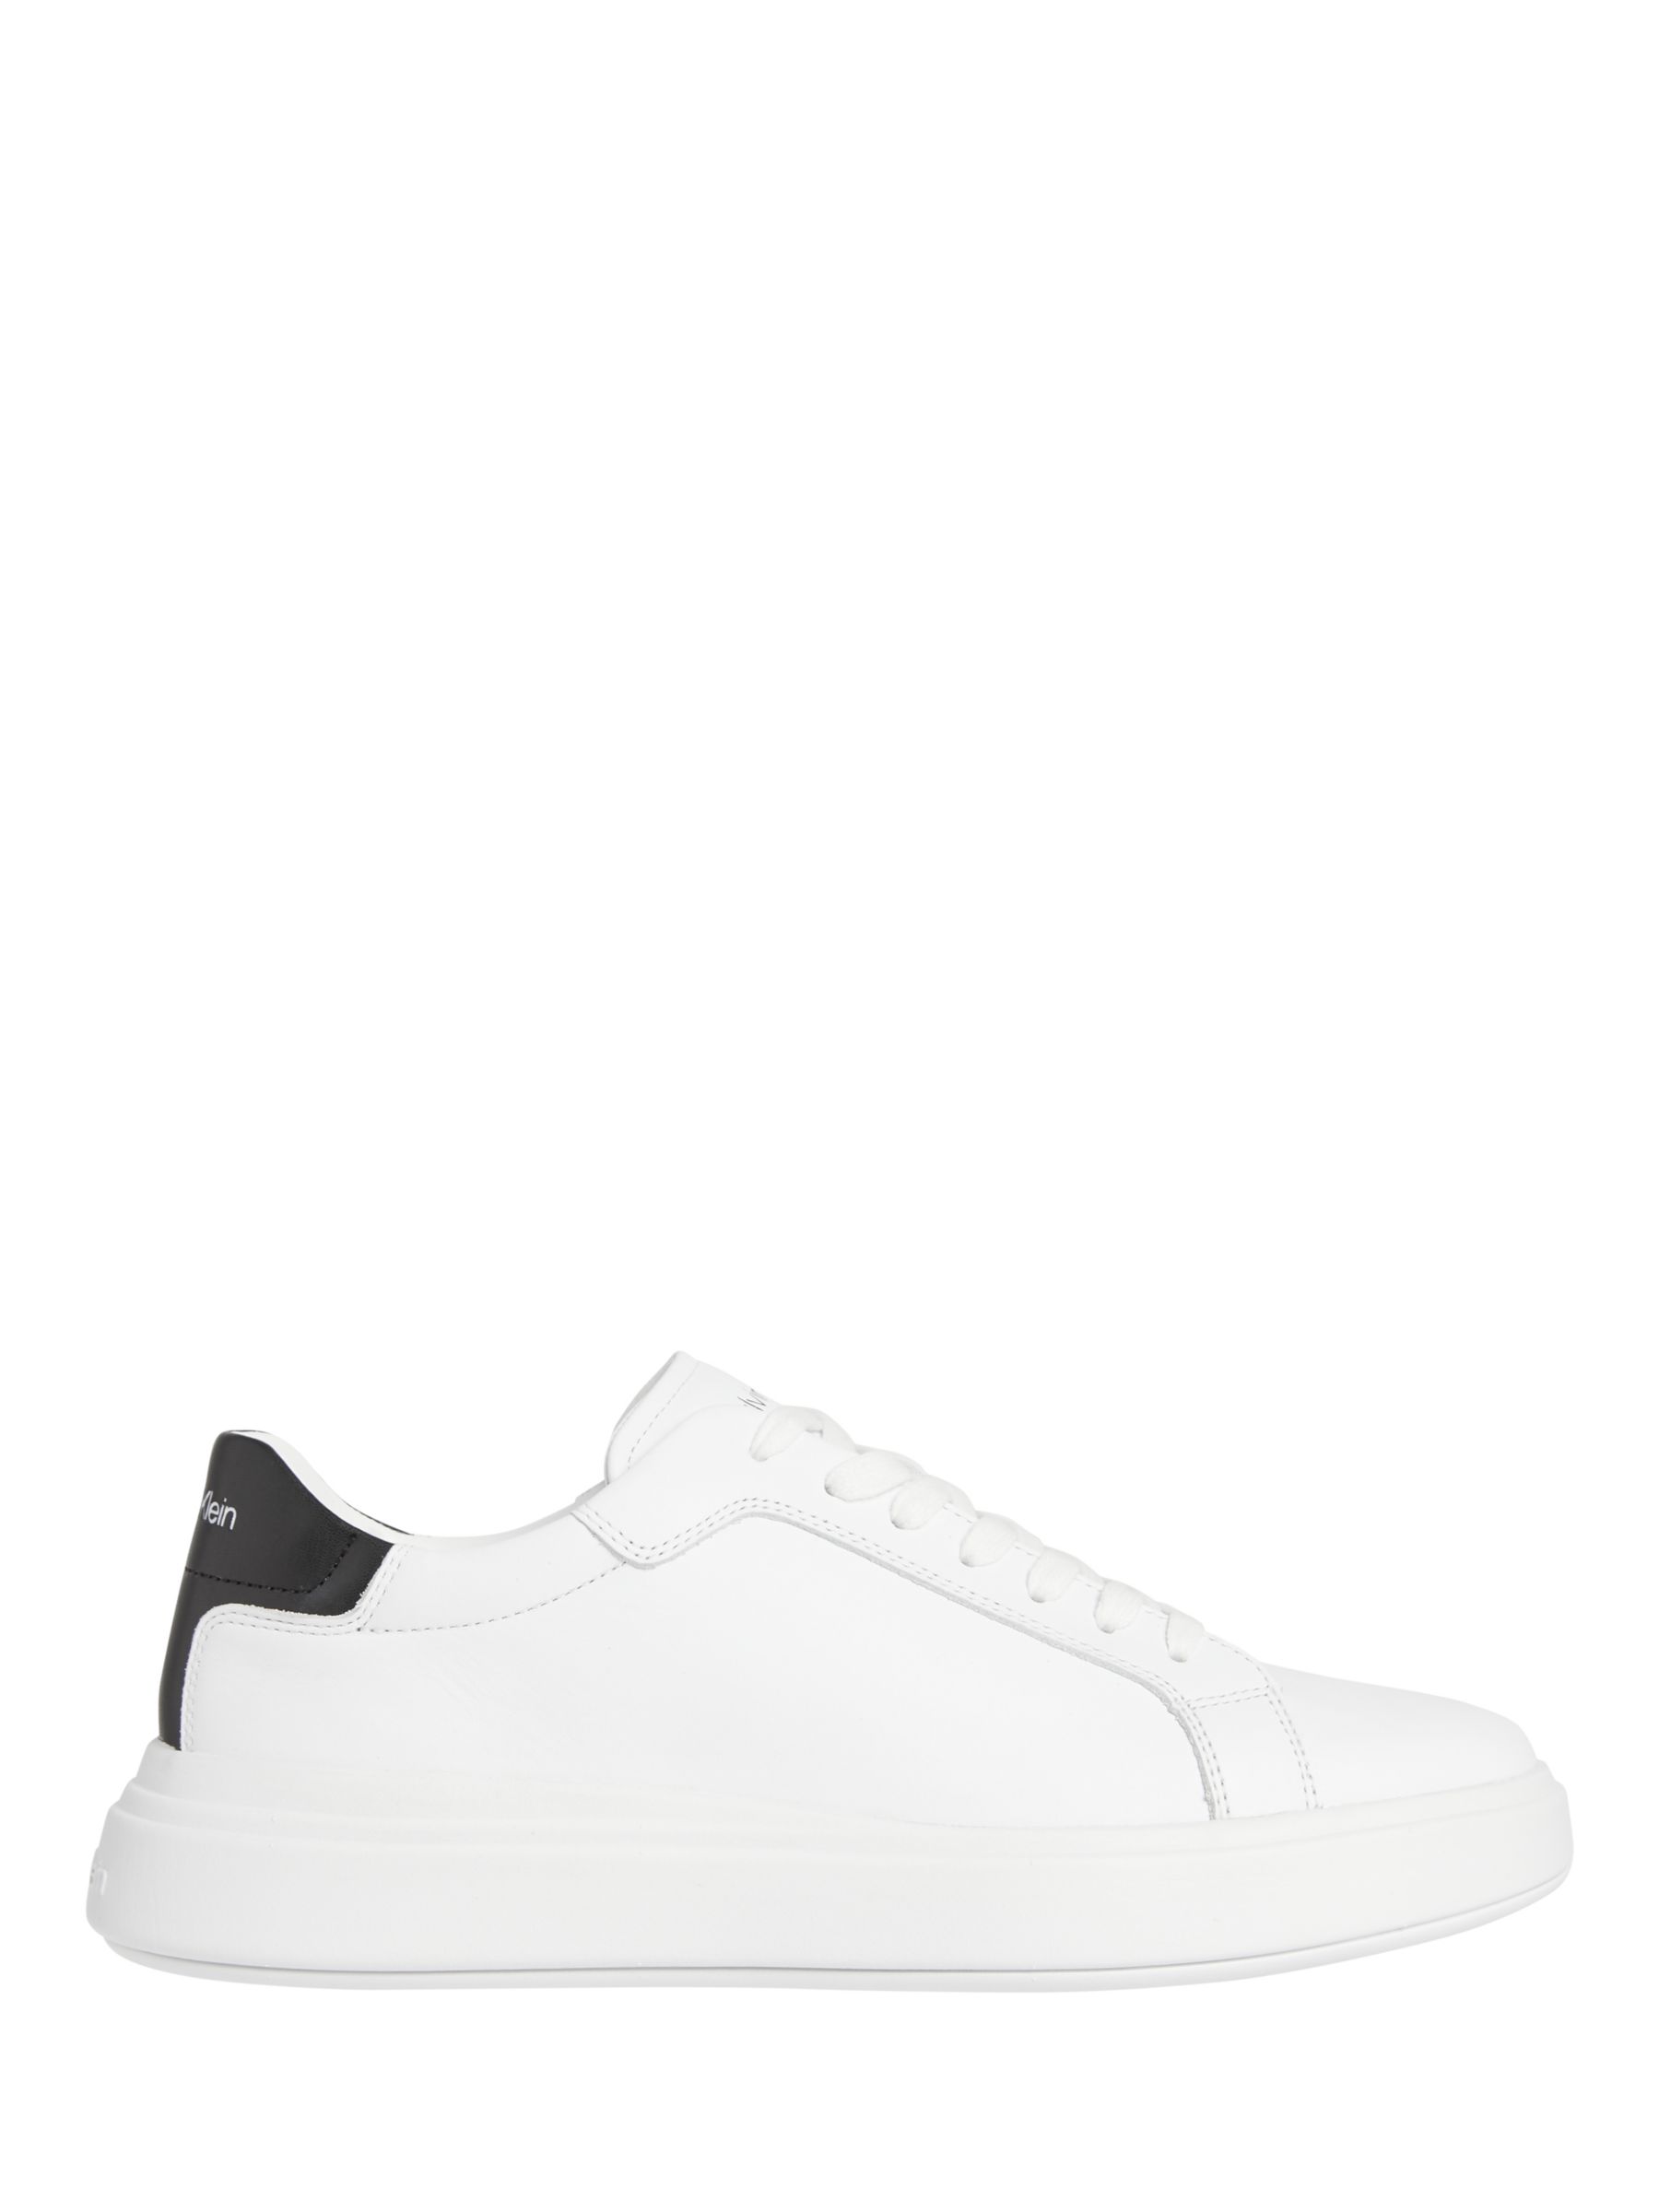 Calvin Klein Leather Low Top Lace Up Trainers, White/Black at John Lewis &  Partners